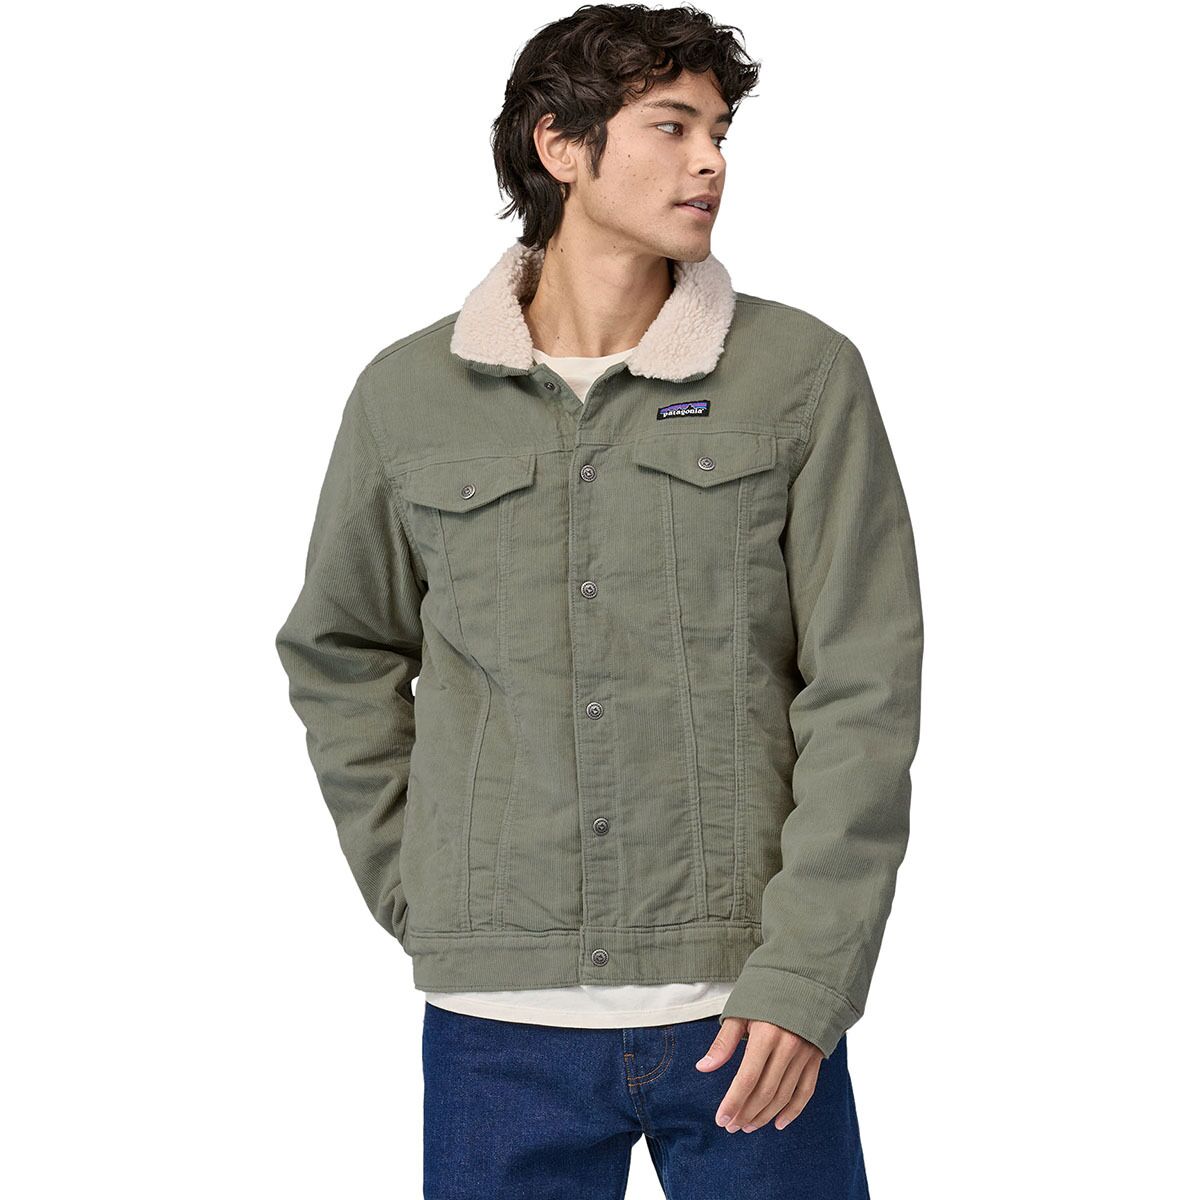 Patagonia Pile-Lined Trucker Jacket - Men's - Clothing